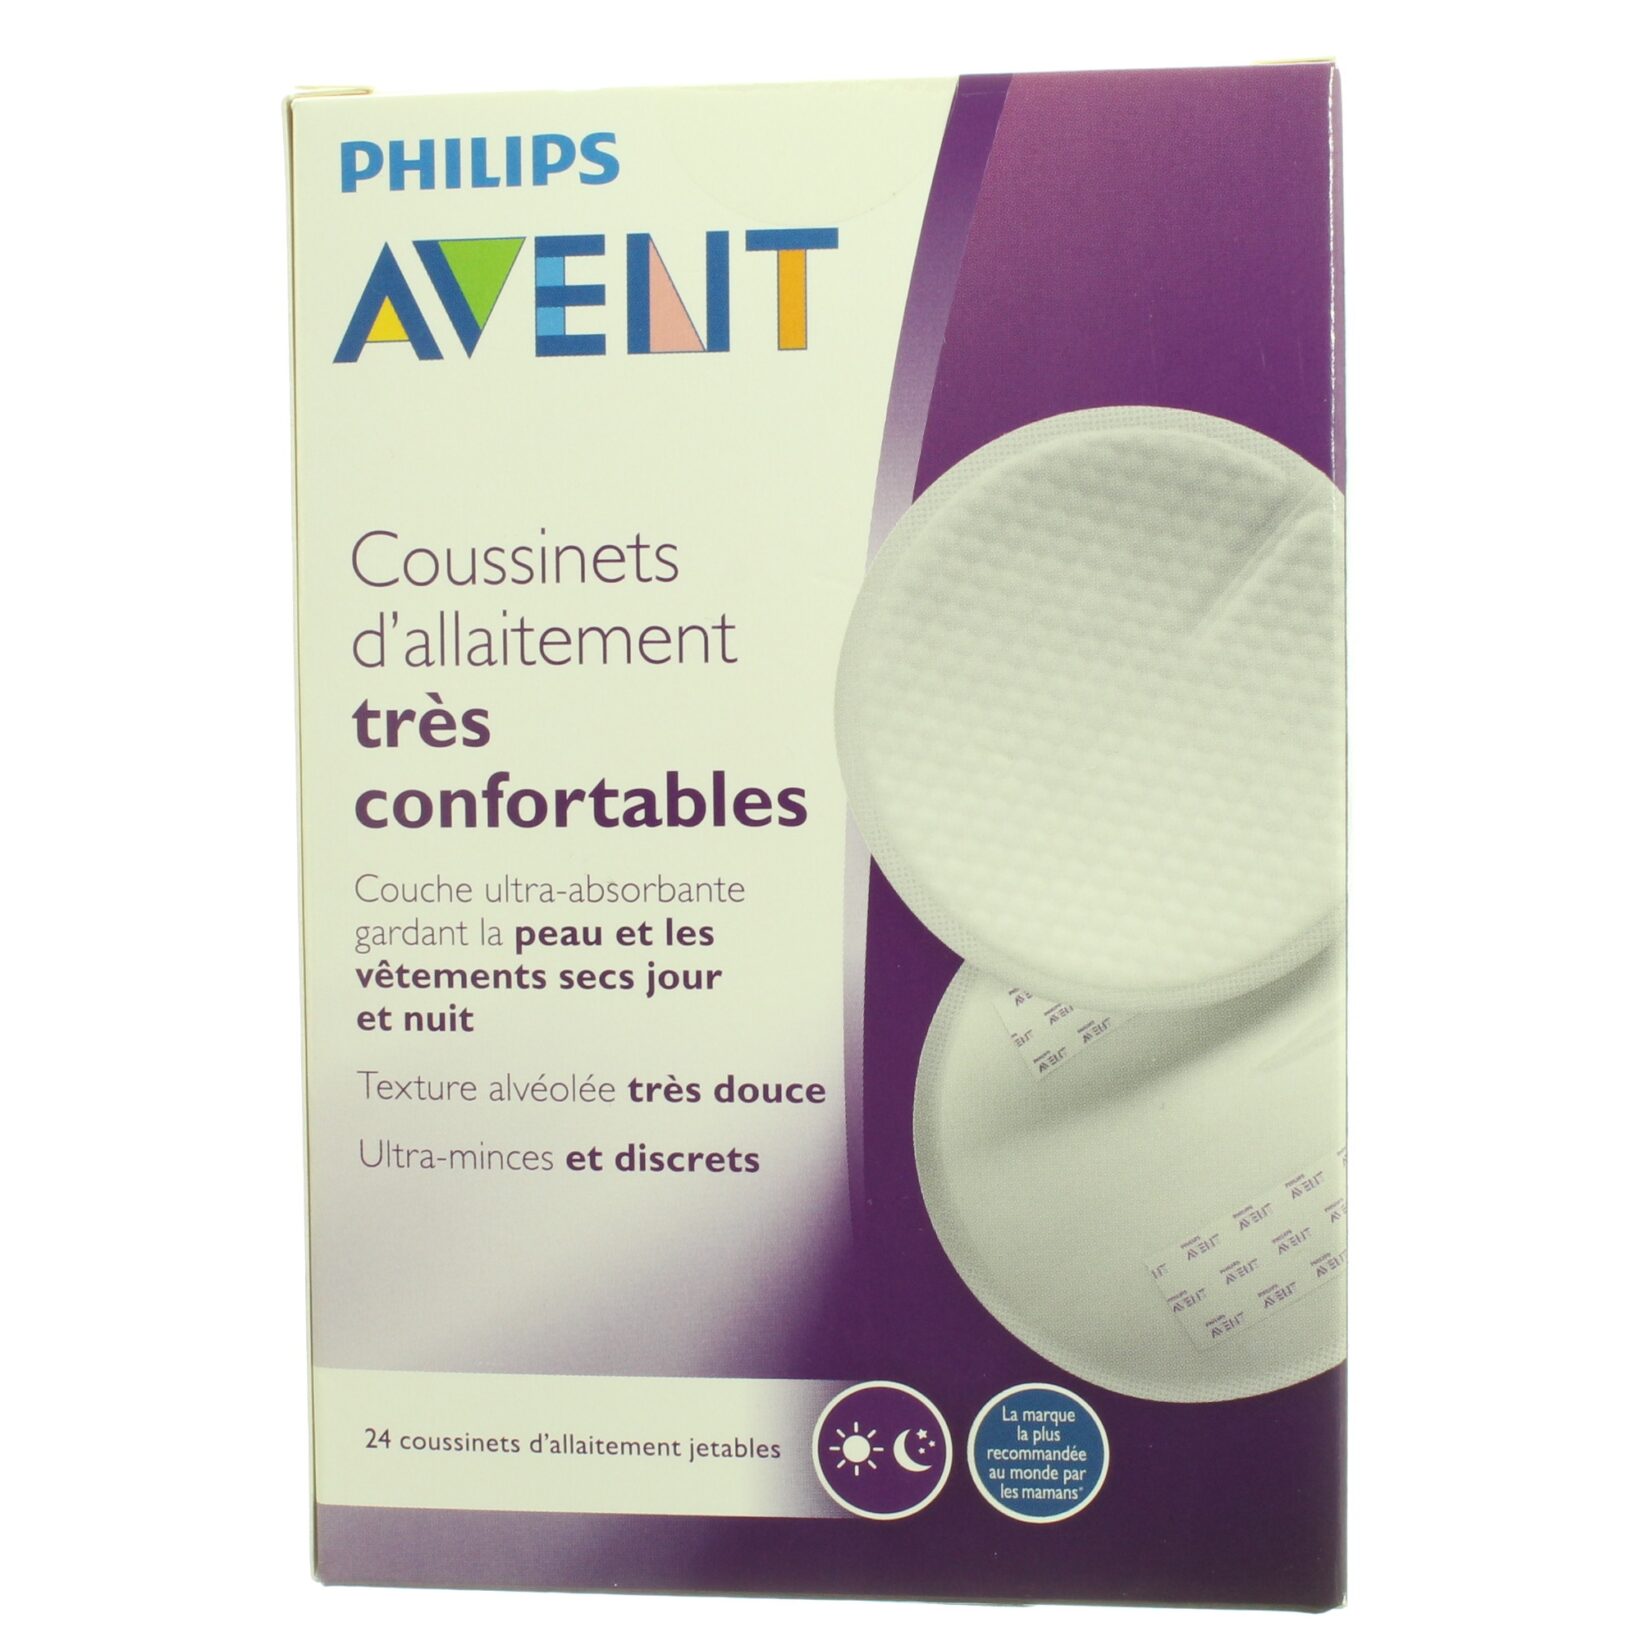 AVENT-PHILIPS COMFORT BREAST PADS 24 - Valcyn Ltd. St lucia 